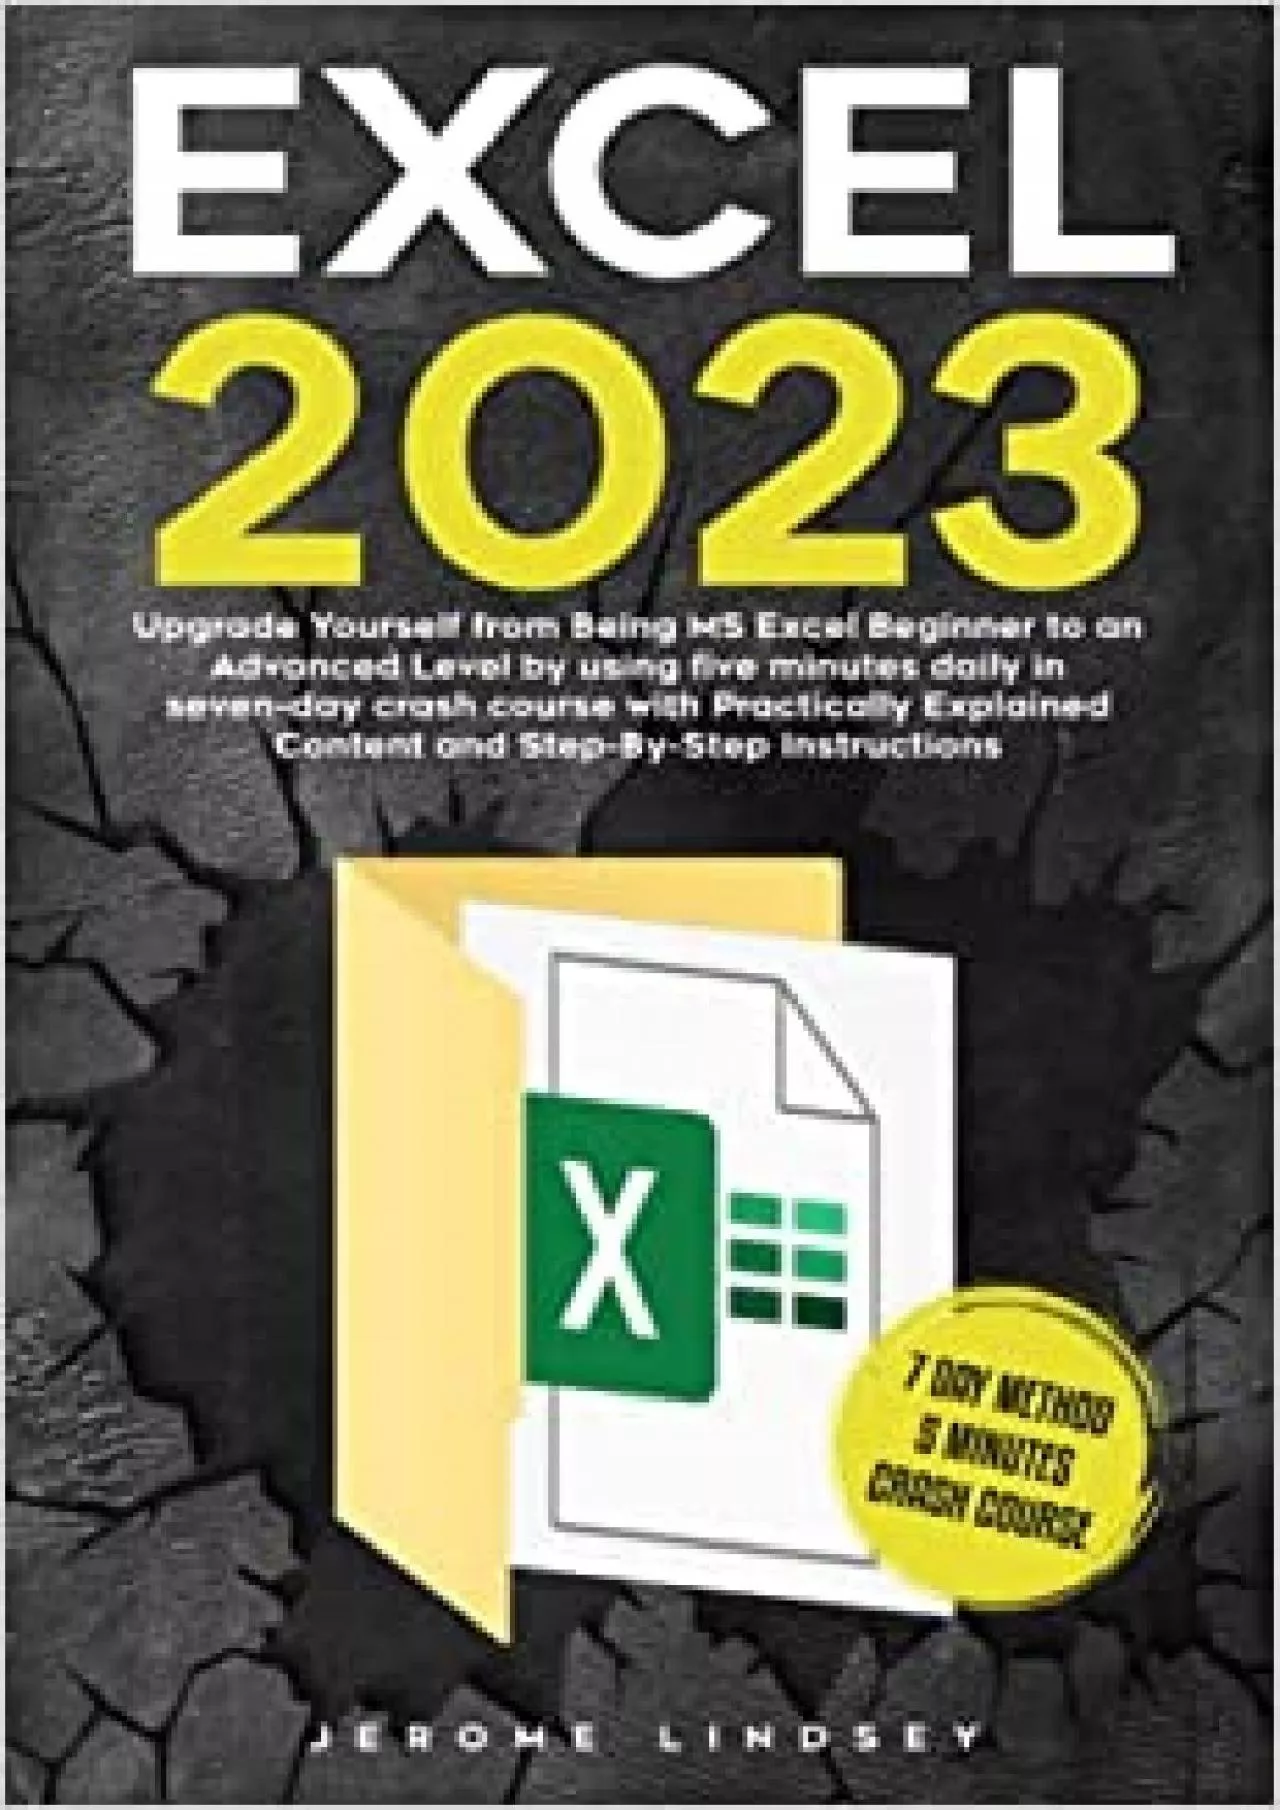 Excel 2023: Upgrade Yourself from Being MS Excel Beginner to an Advanced Level by using